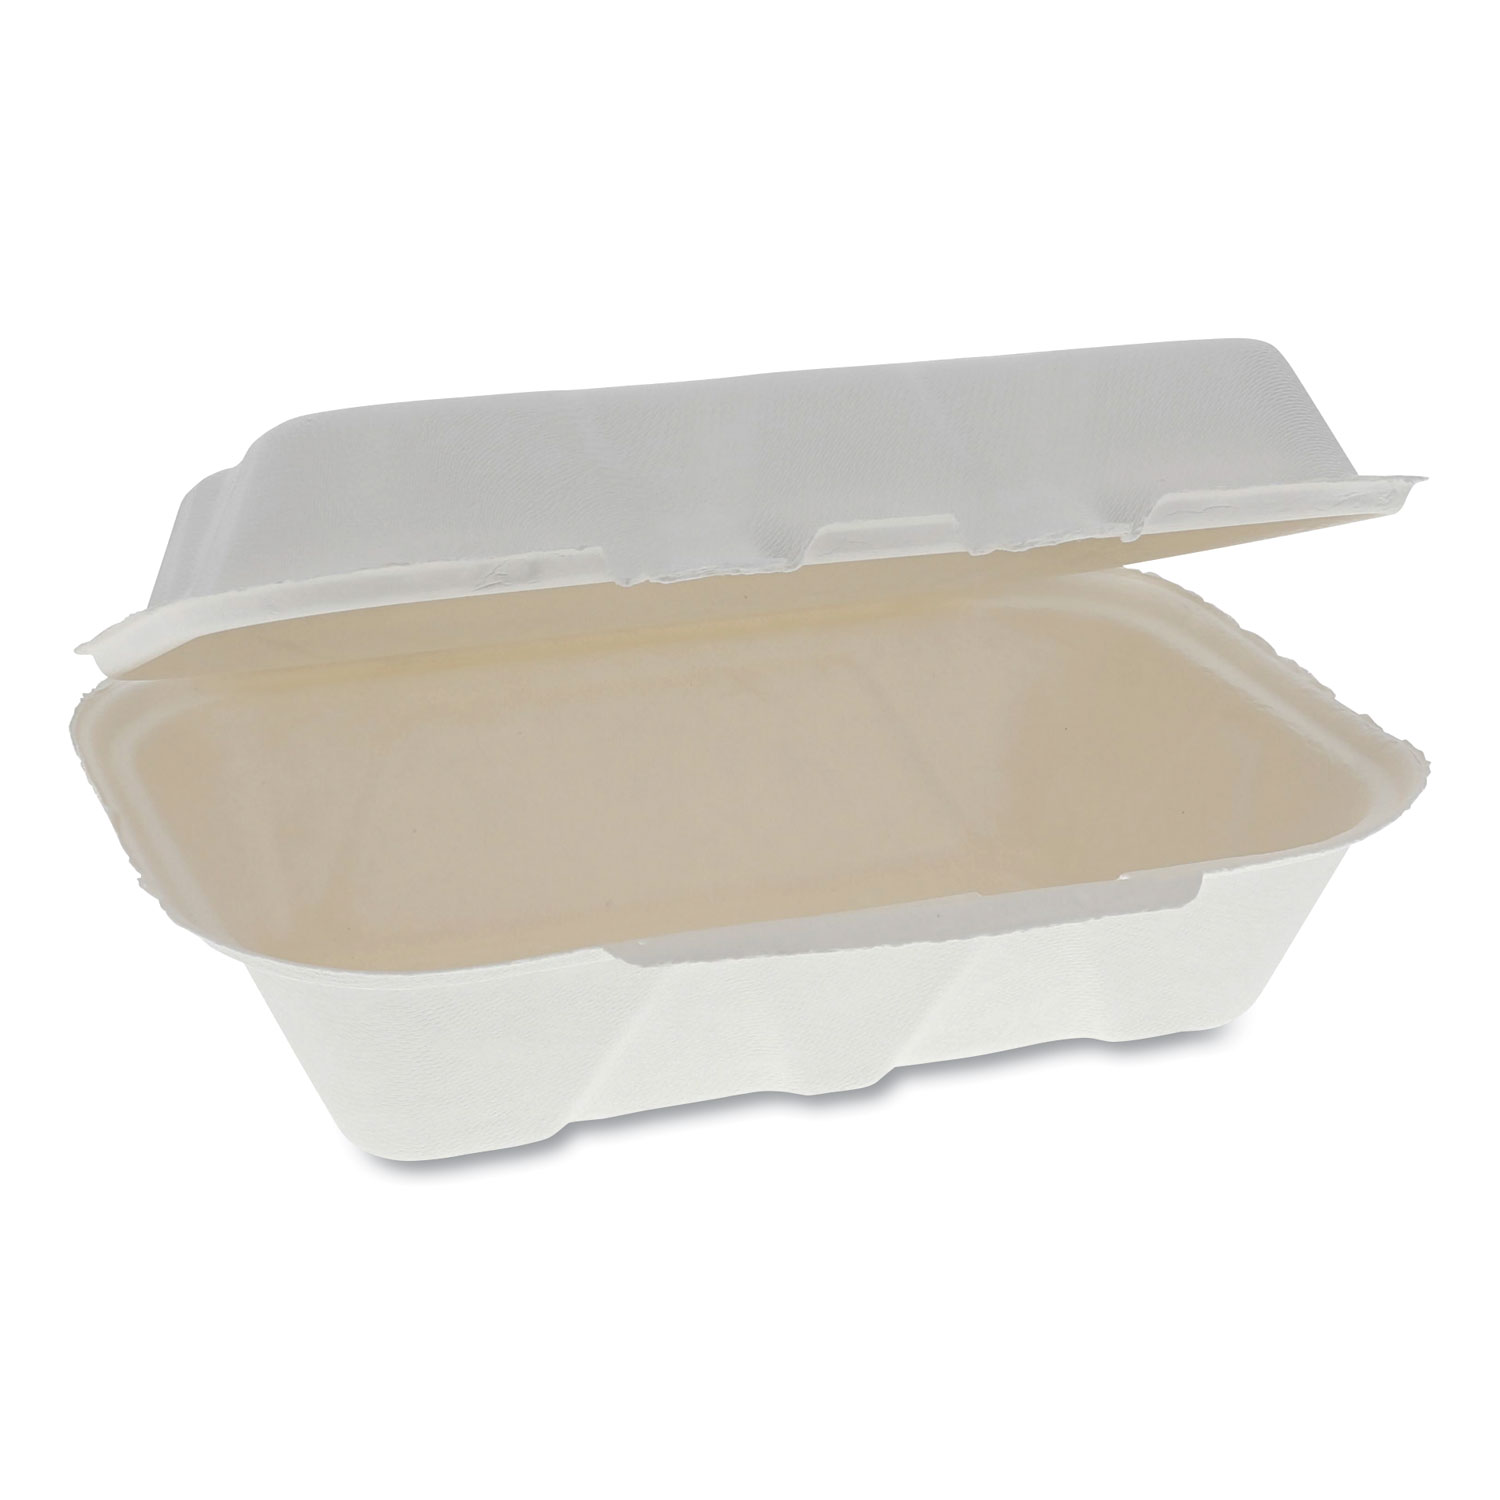  Pactiv YMCH00890001 EarthChoice Bagasse Hinged Lid Container, 9.1 x 6.1 x 3.3, 1-Compartment, Natural, 150/Carton (PCTYMCH00890001) 